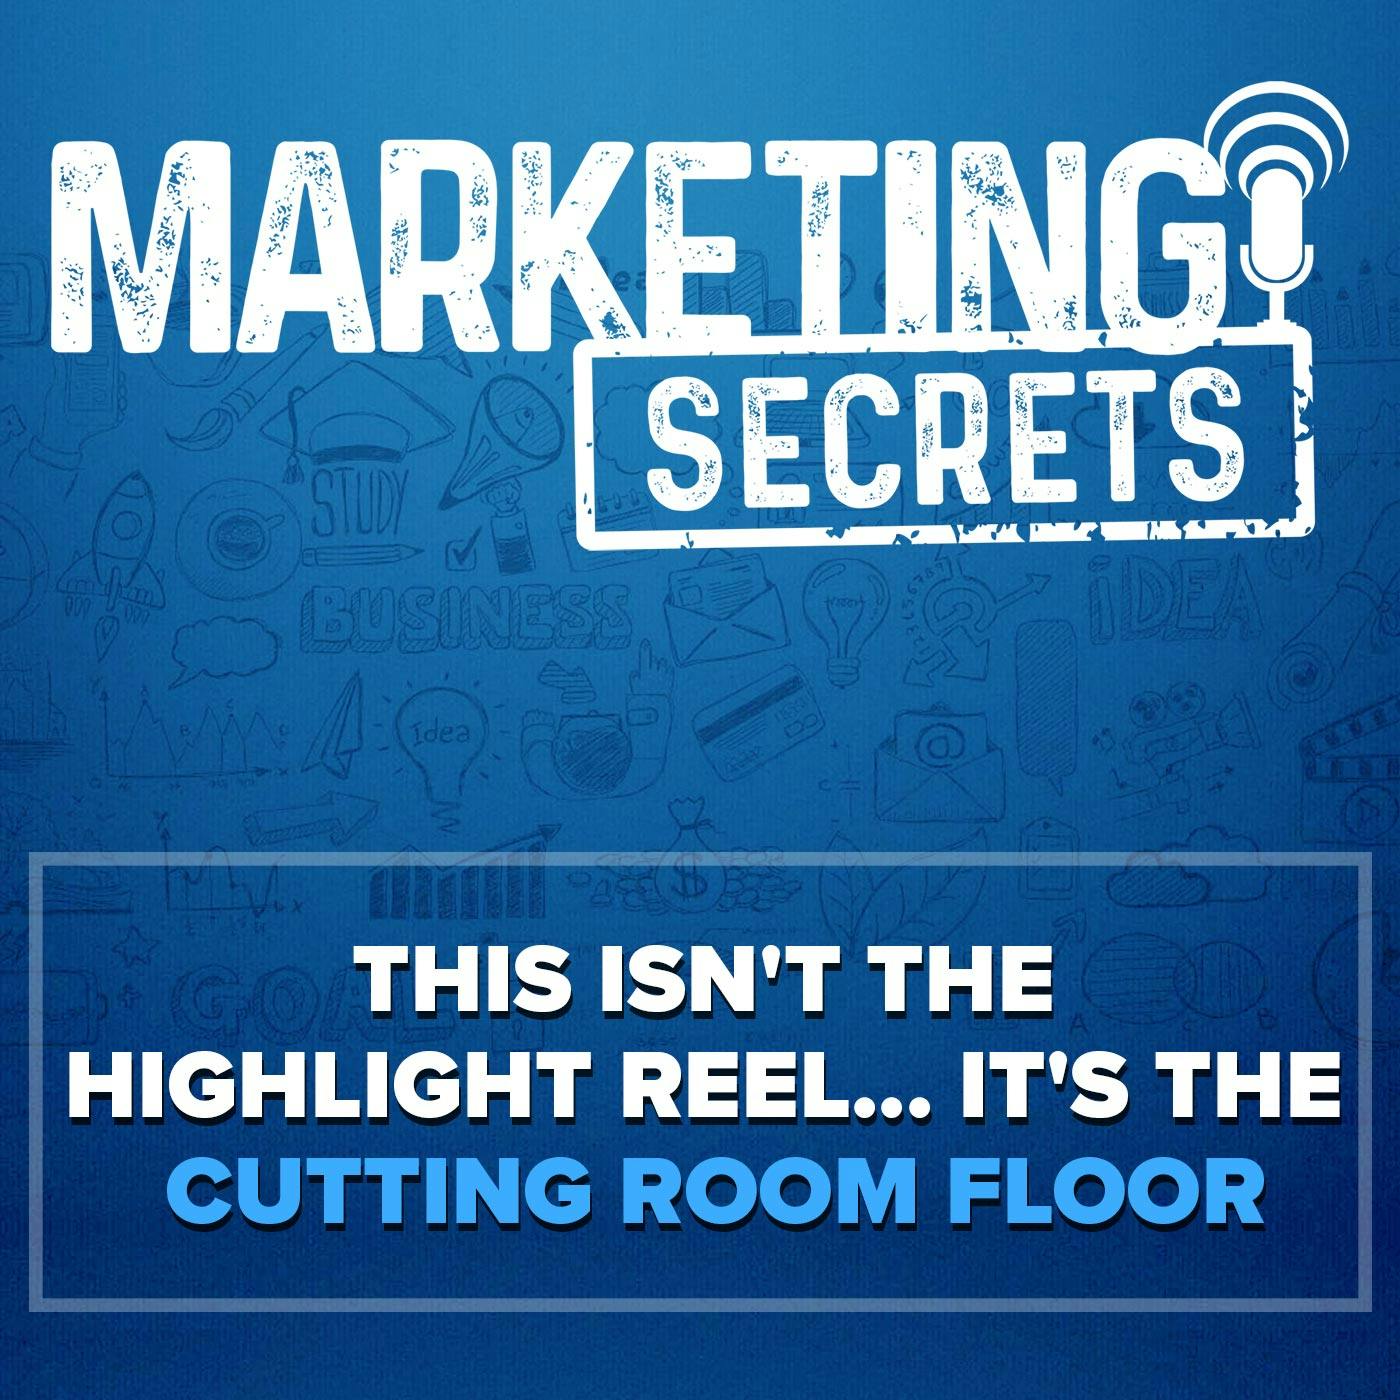 This Isn't The Highlight Reel... It's The Cutting Room Floor by Russell Brunson